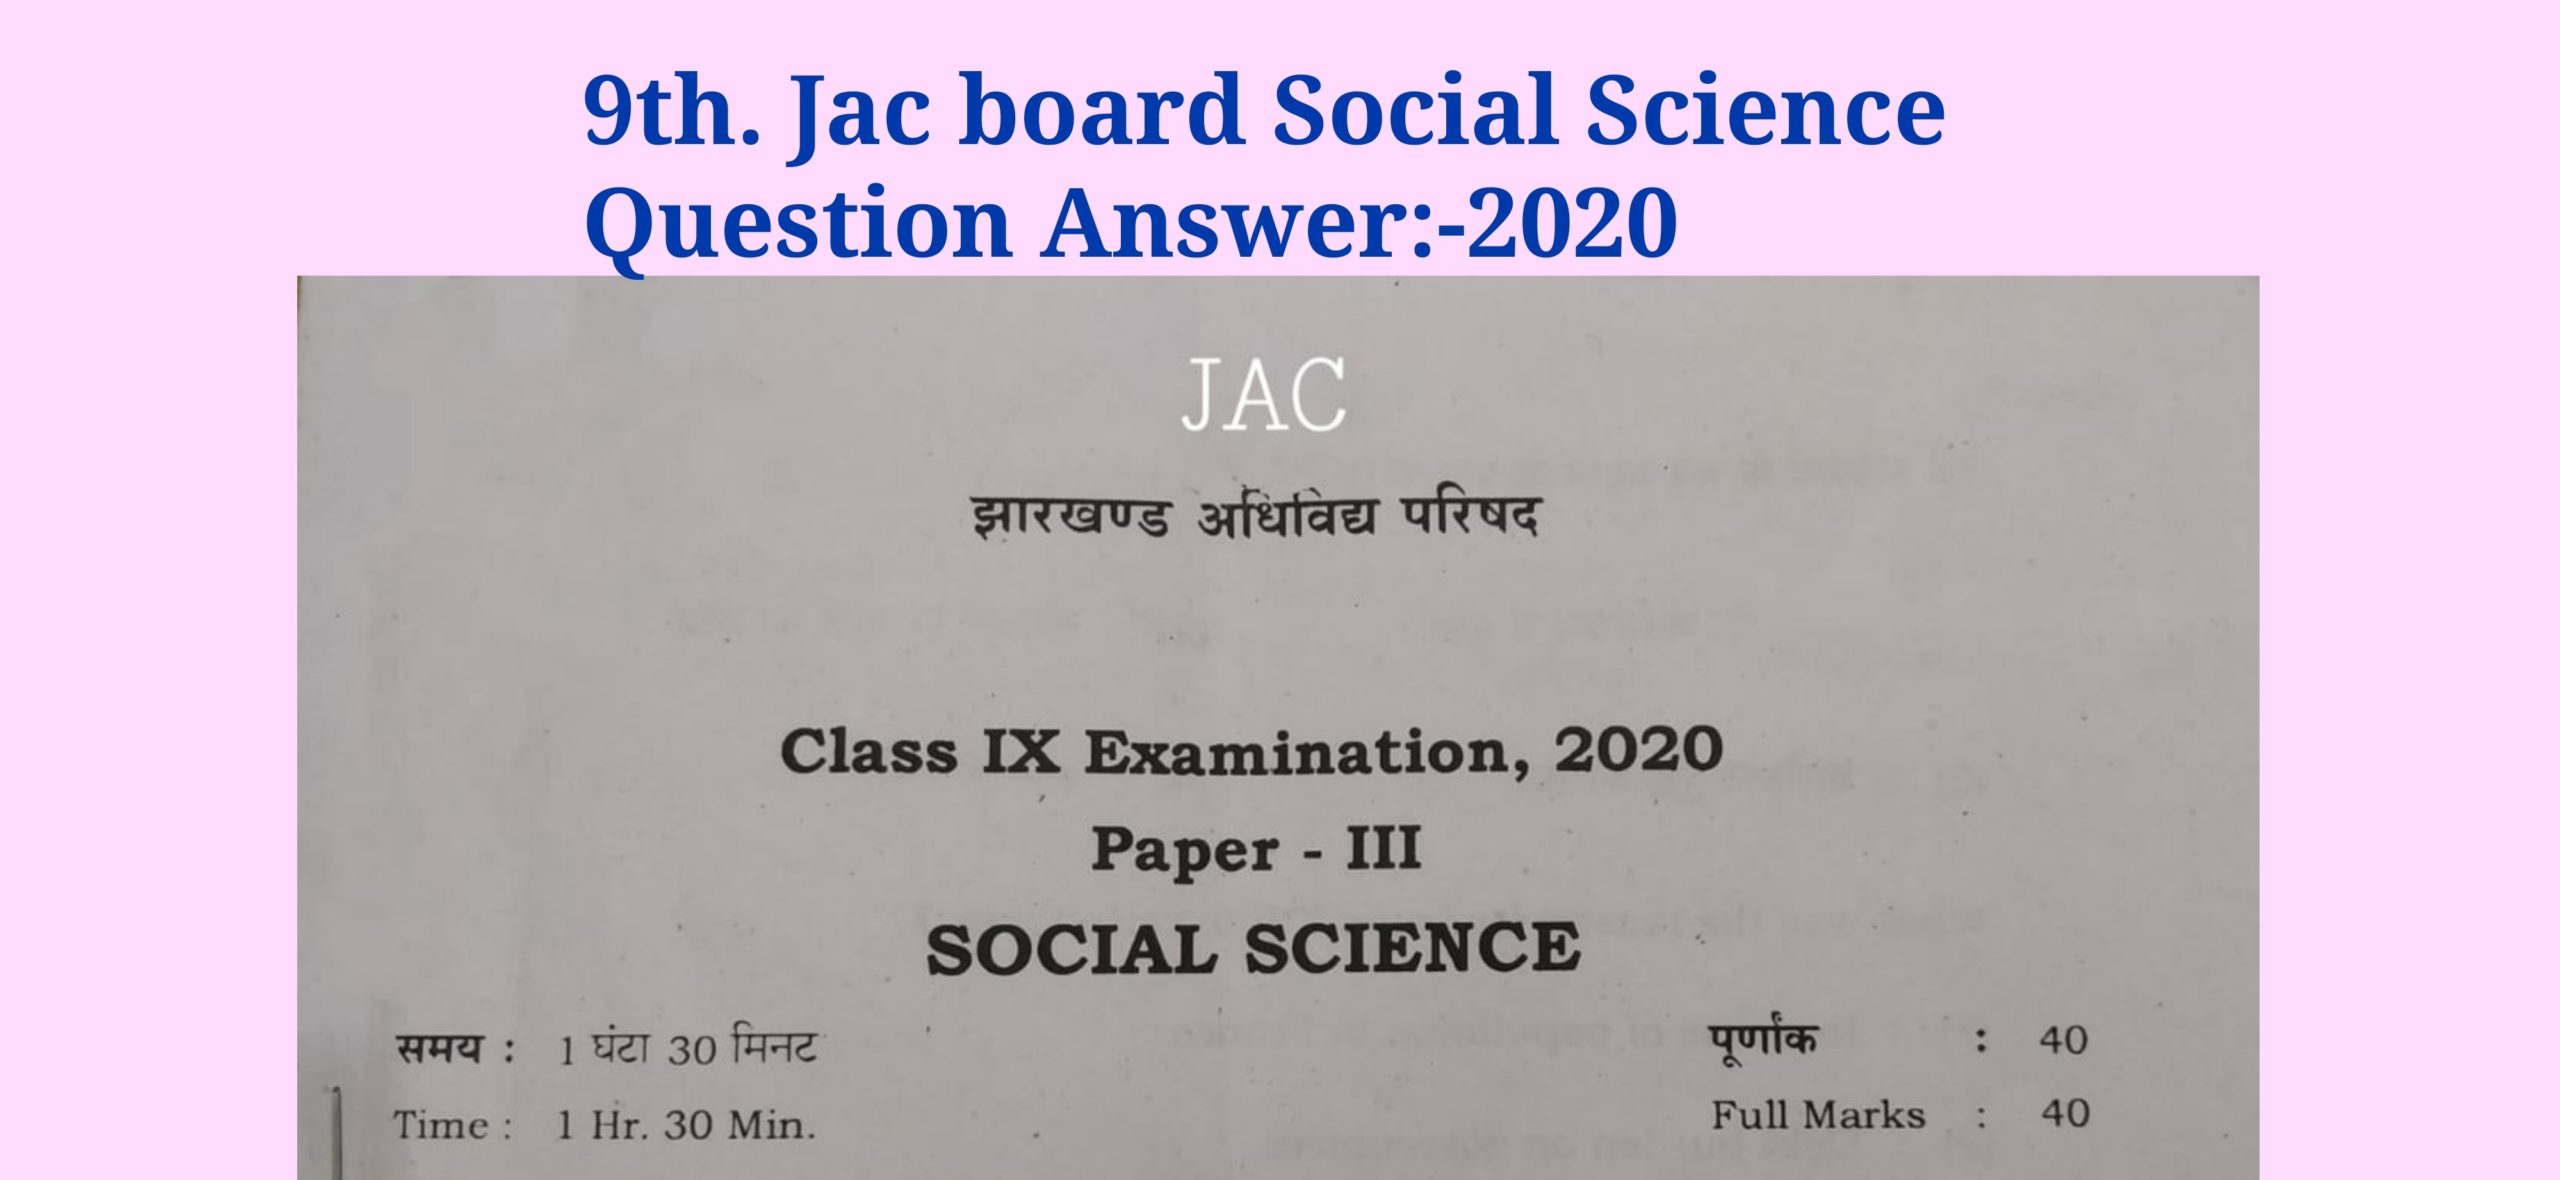 Jac 9th. Board Social Science Question Answer- 2020